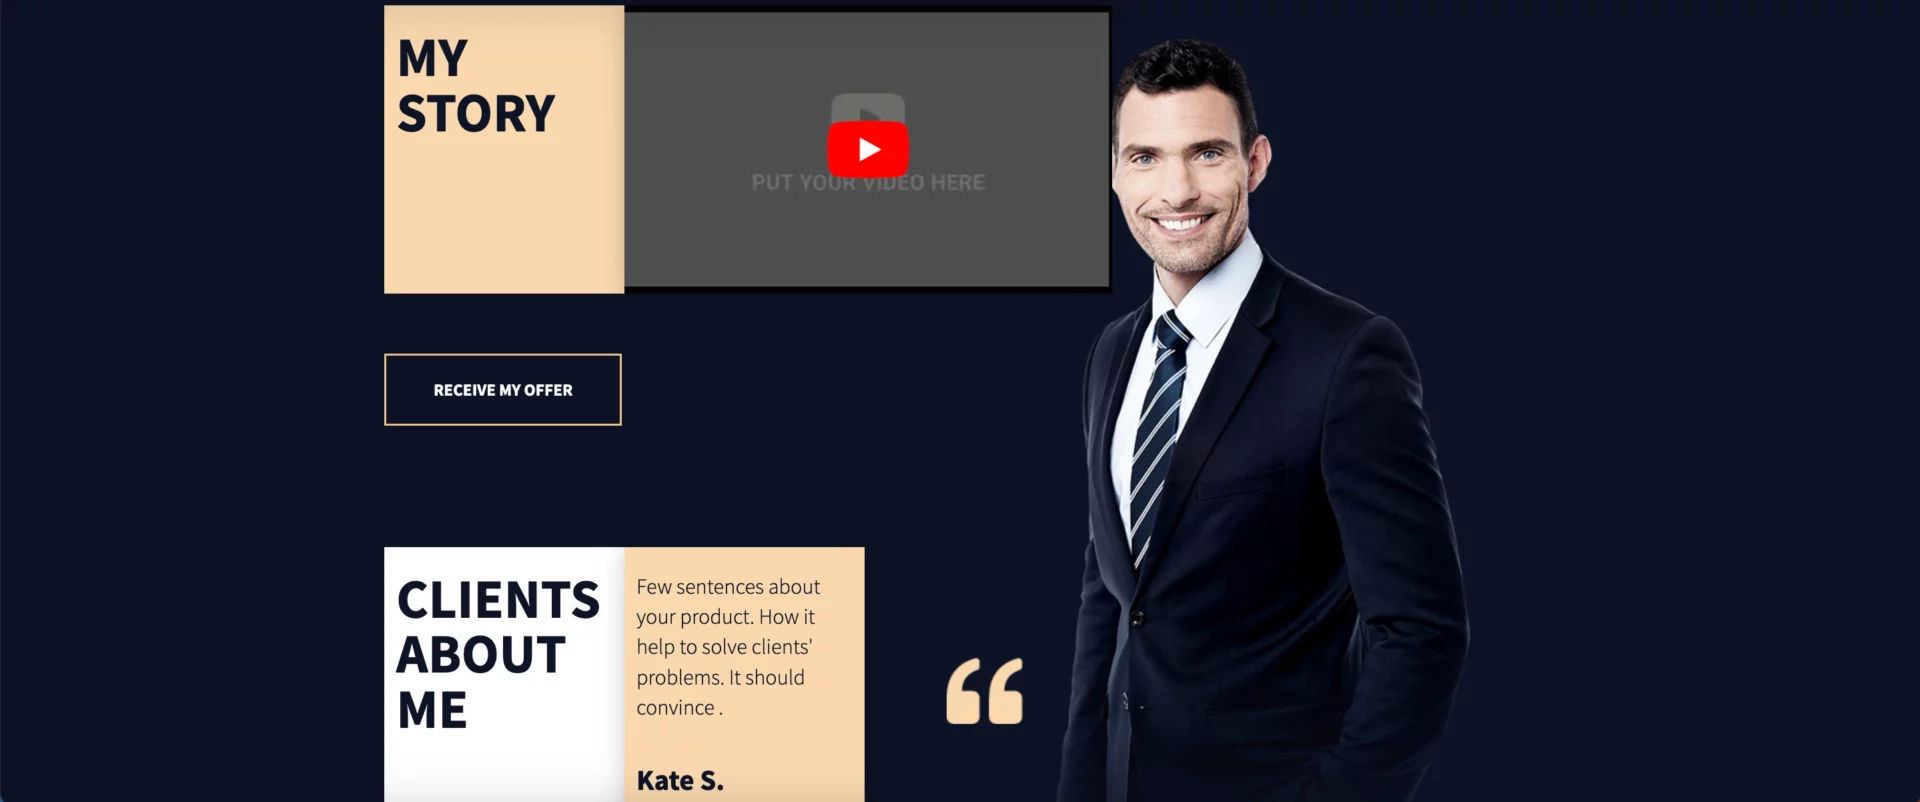 biographical landing page template